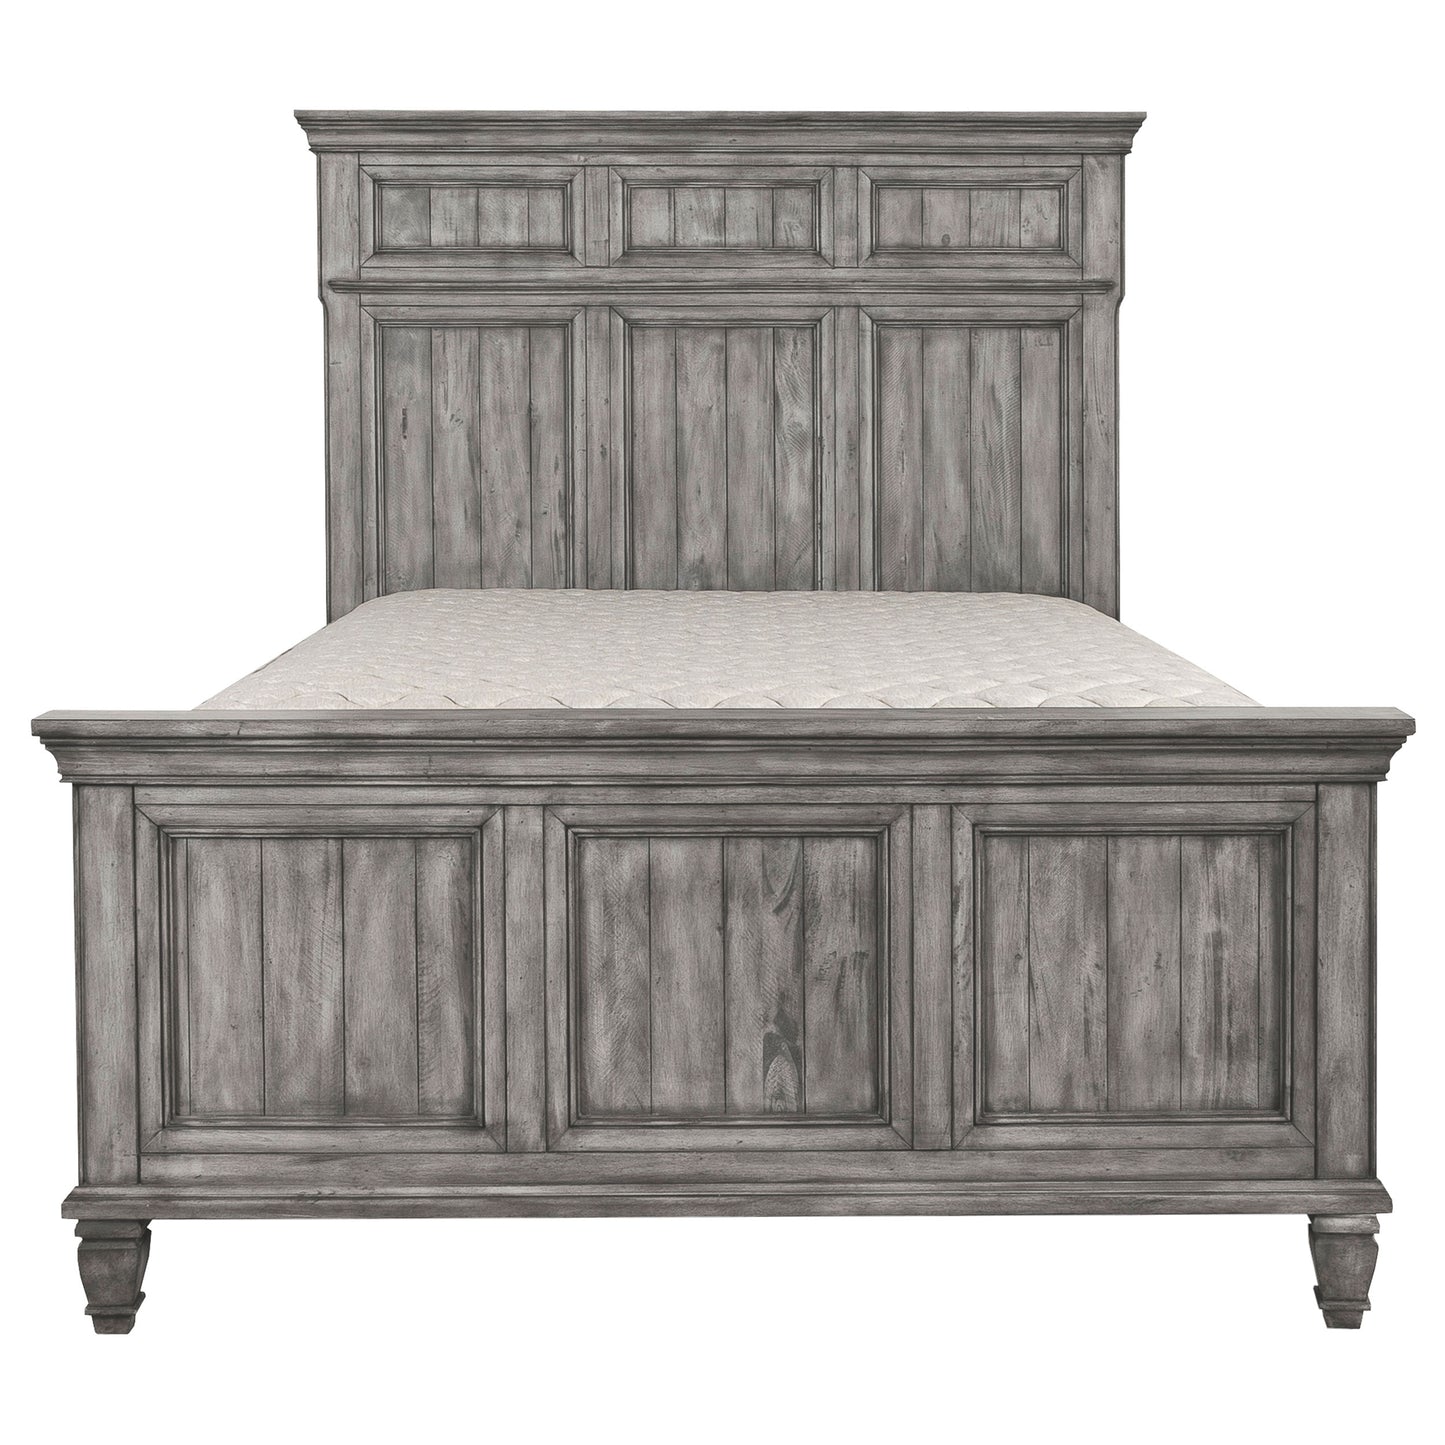 Avenue Wood Eastern King Panel Bed Weathered Grey